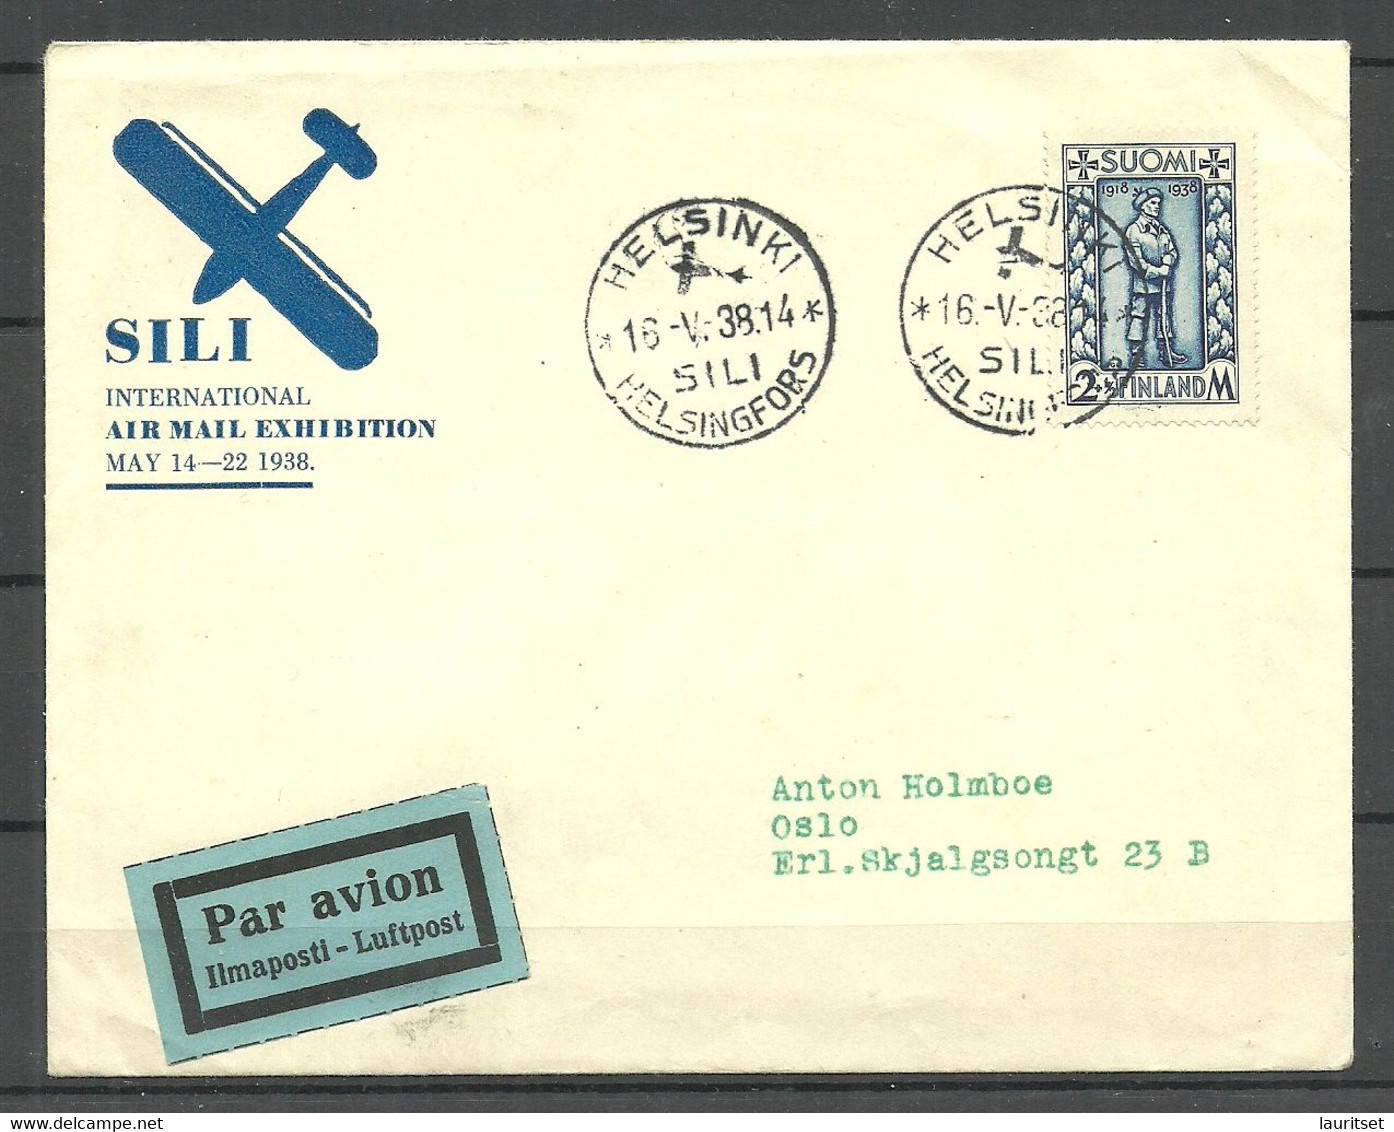 FINLAND 1939 Illustrated Cover SILI International Air Mail Exhibition Flugpost Air Plane Michel 211 As Single FDC? - Storia Postale